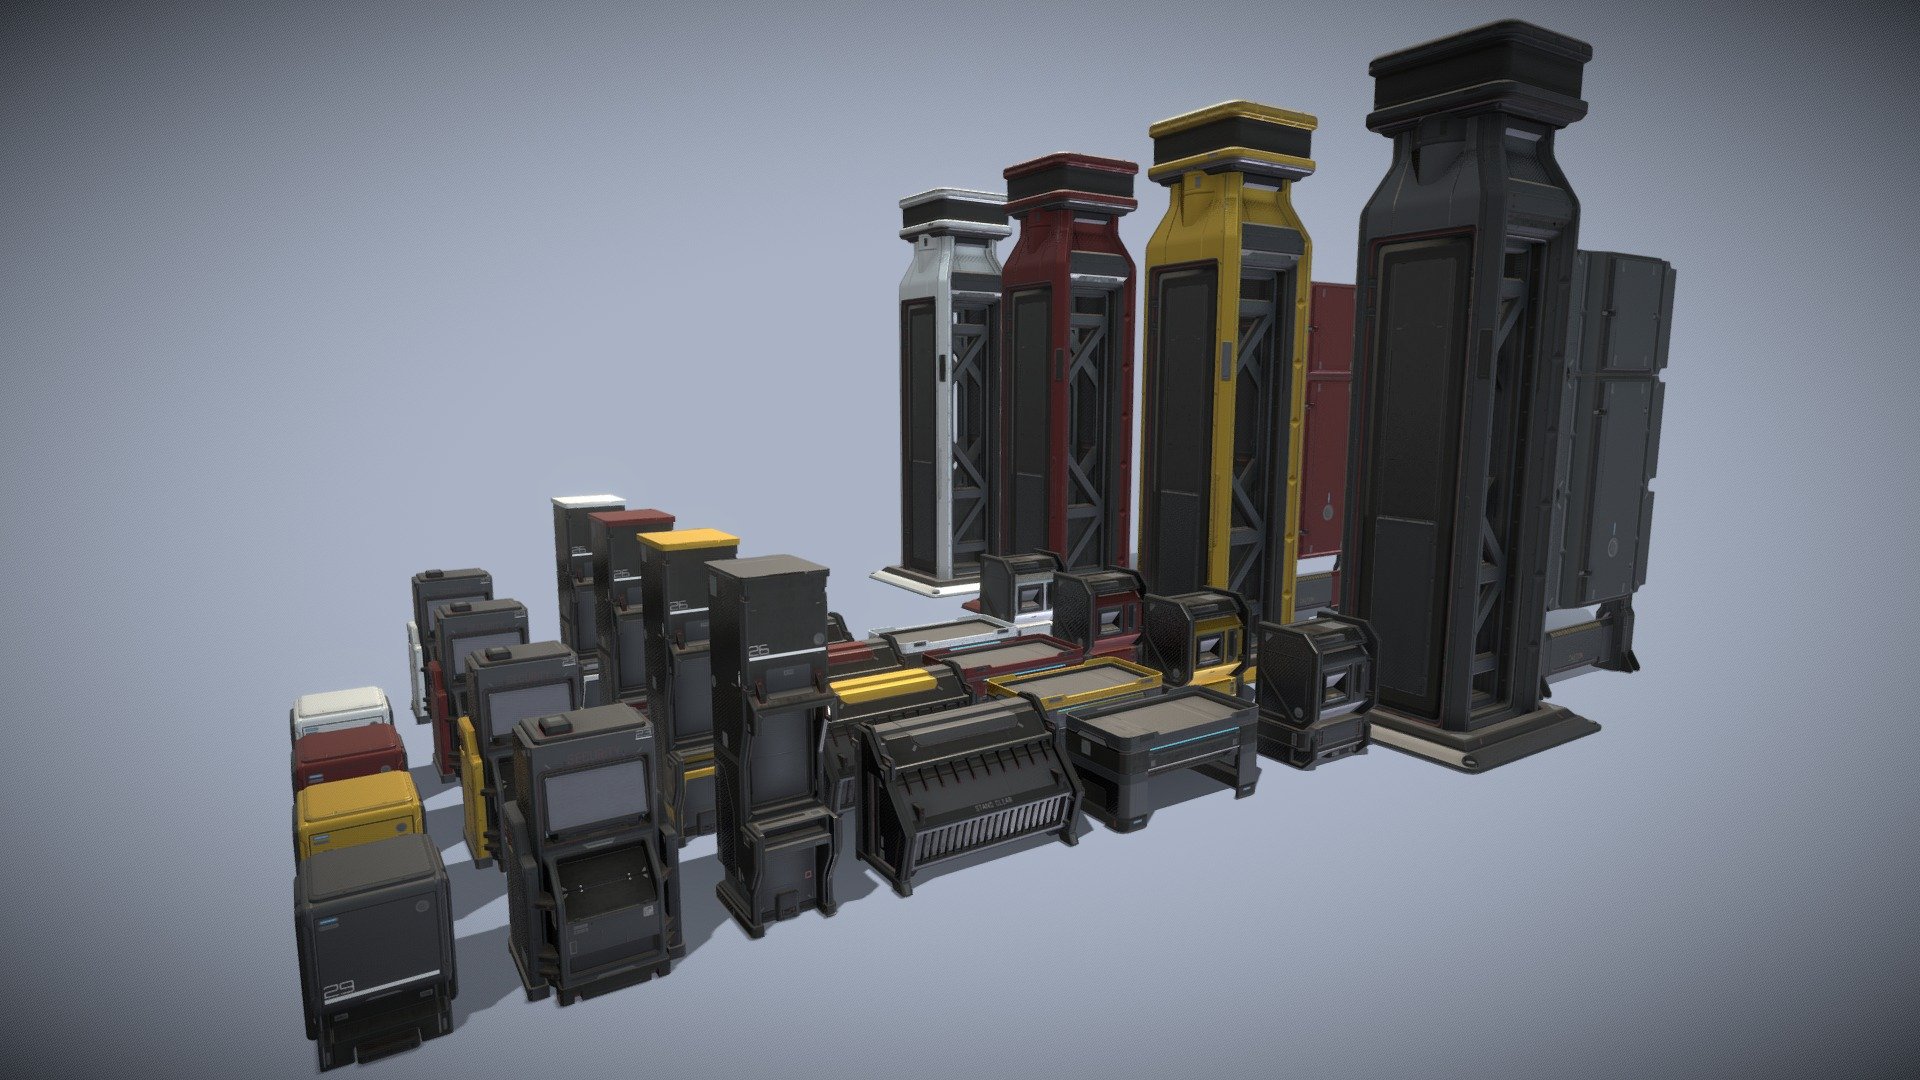 This is an environment props I made in blender using 2 main gun metal color trimsheet materials that are duplicated to red, yellow and white. And 1 material for the decals. If you turn on the visibility of the wireframes you'll be able to see and noticed that it's relatively low-poly and that most of the details are from the trimsheets. 

The lighting is a lot better in blender because I'm only allowed 3 lights here in sketchfab 3d model